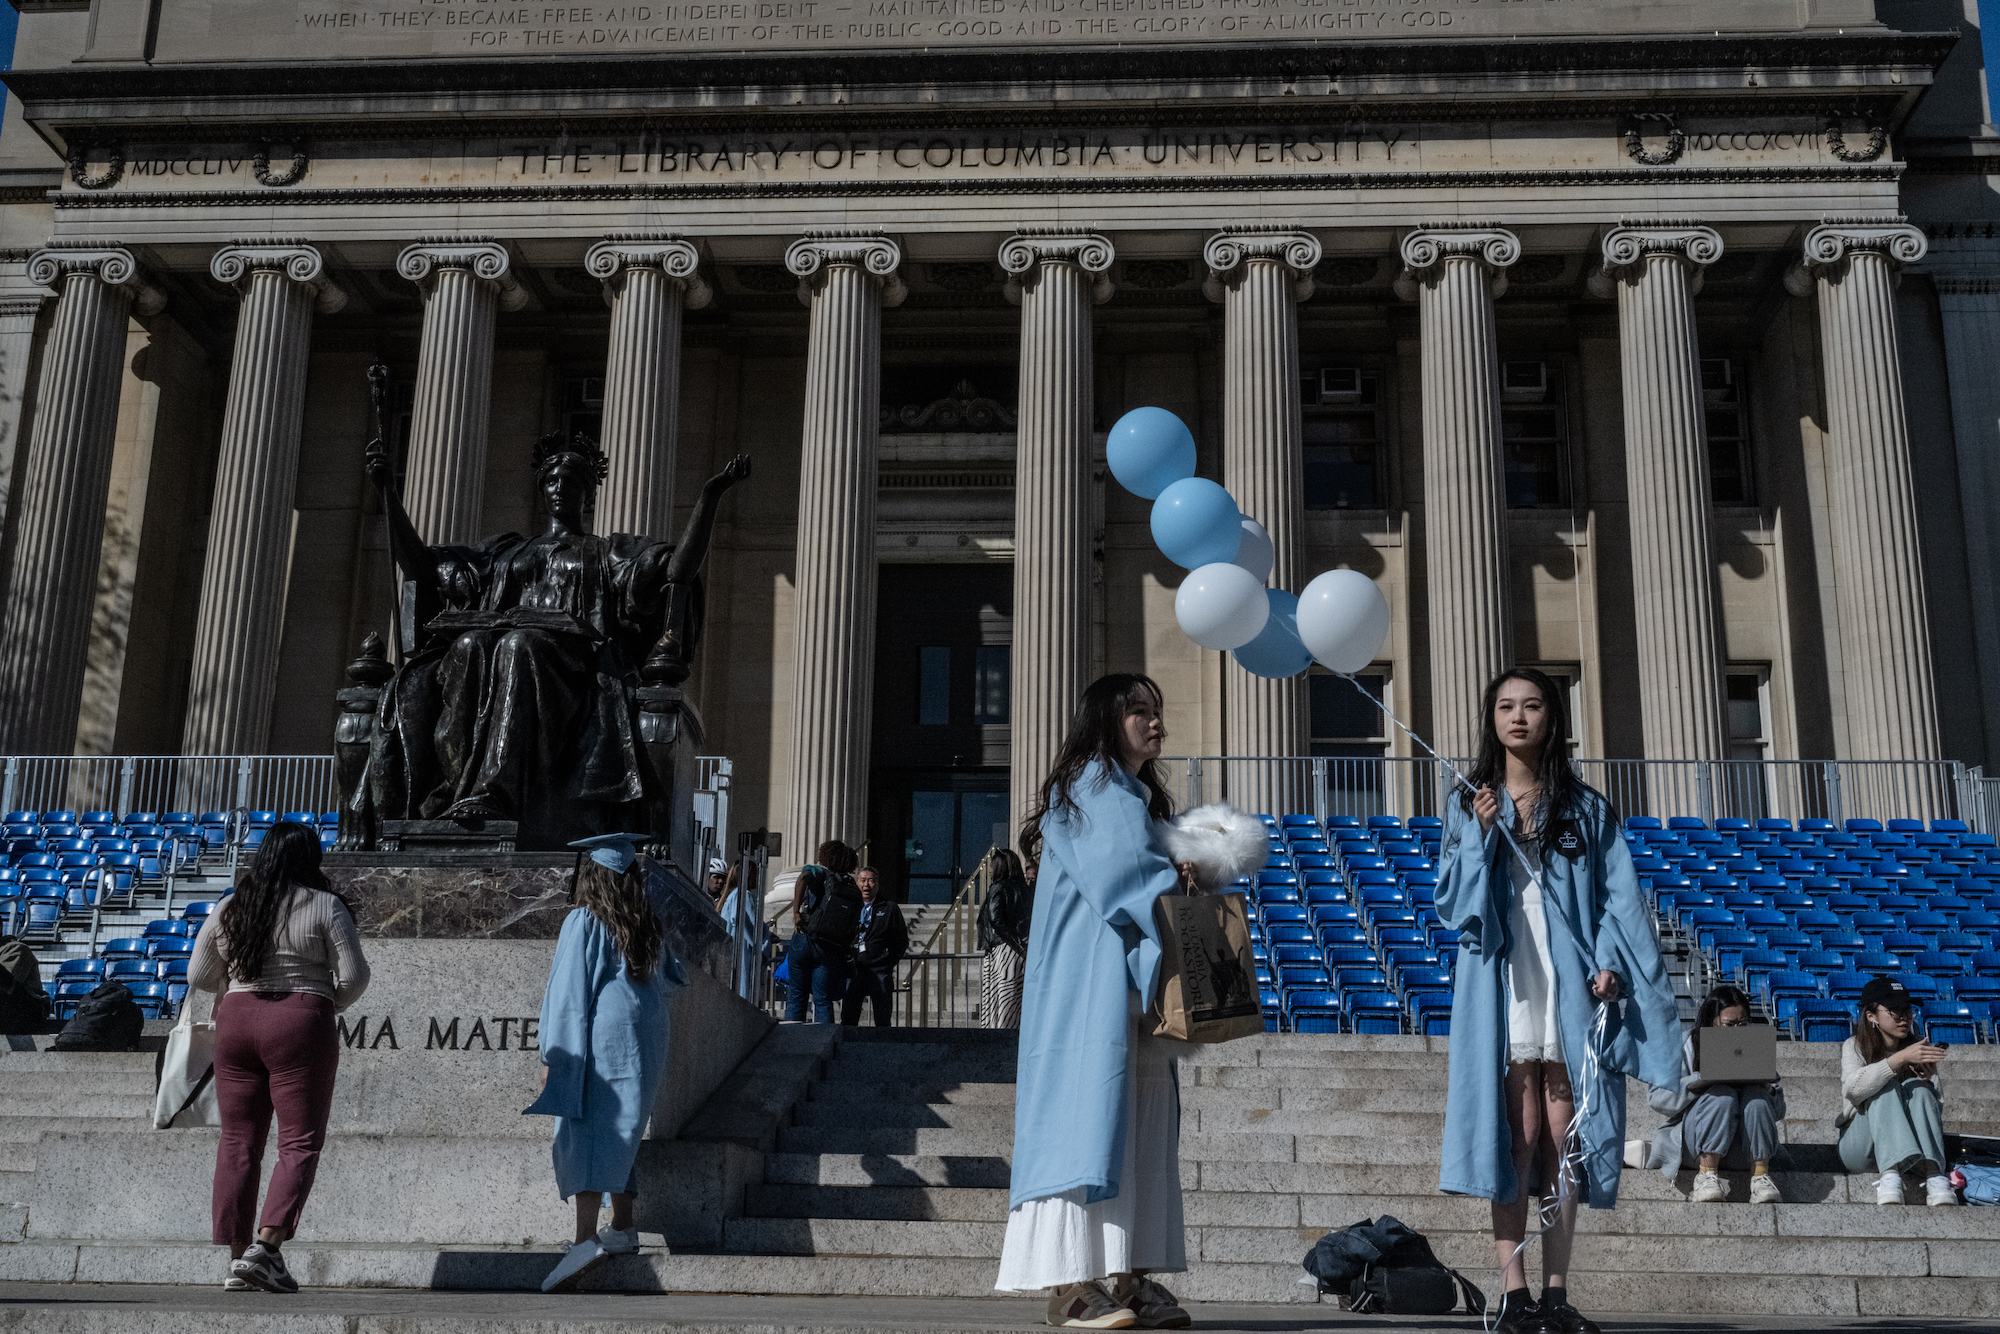 Students pose in their graduation gowns at Columbia University in New York City on April 25.